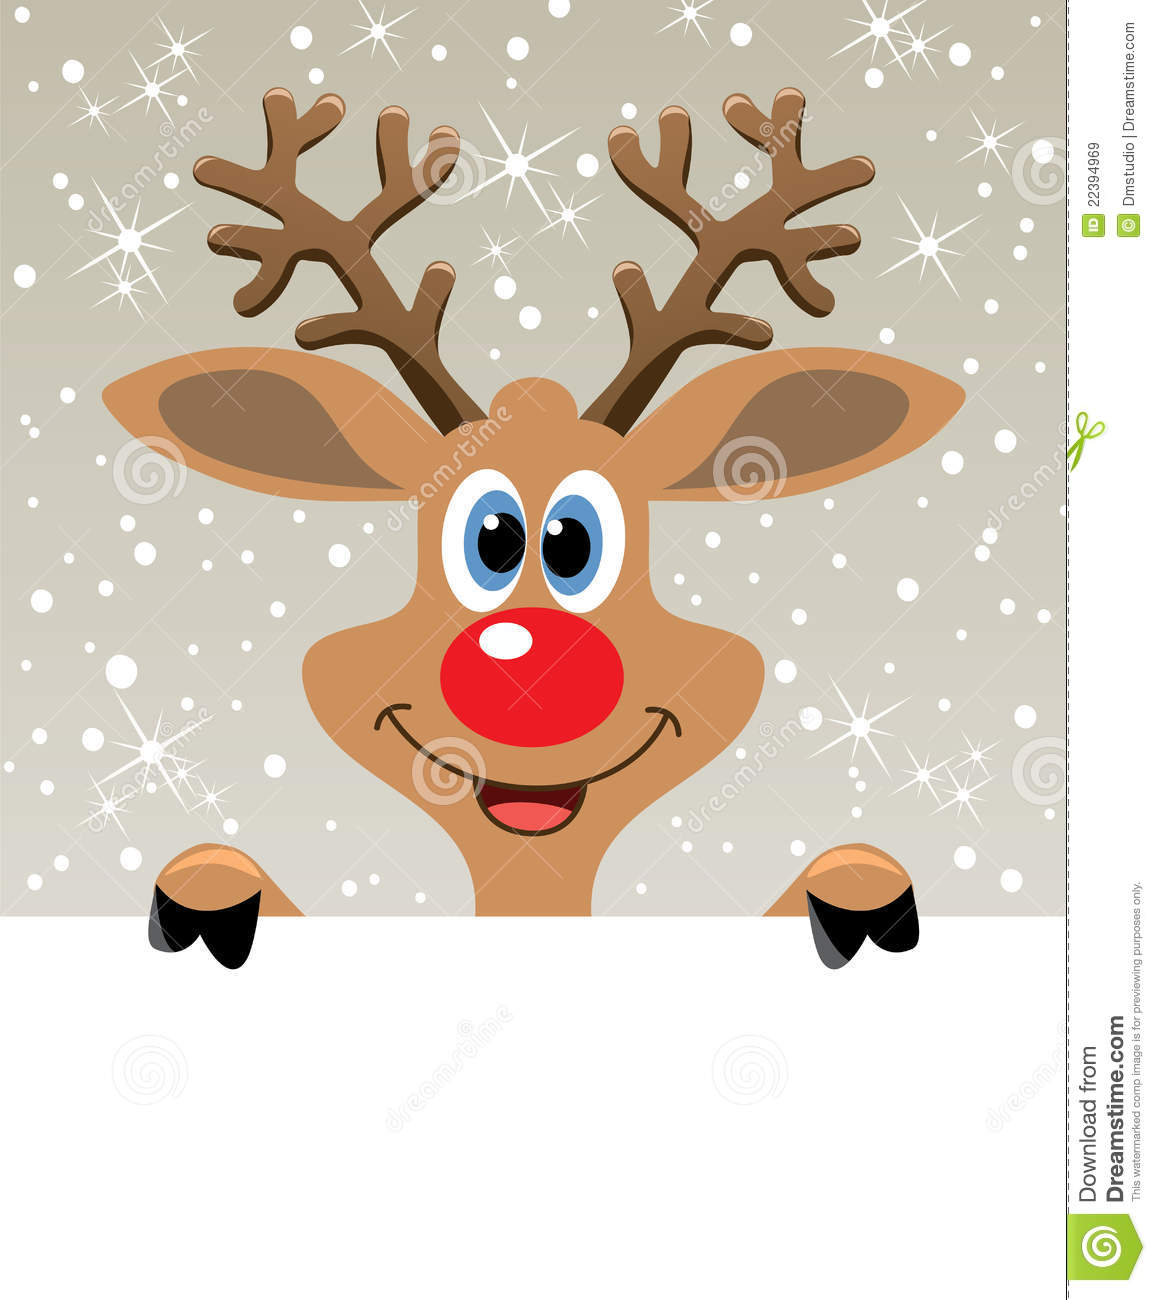 Rudolph Red-Nosed Reindeer